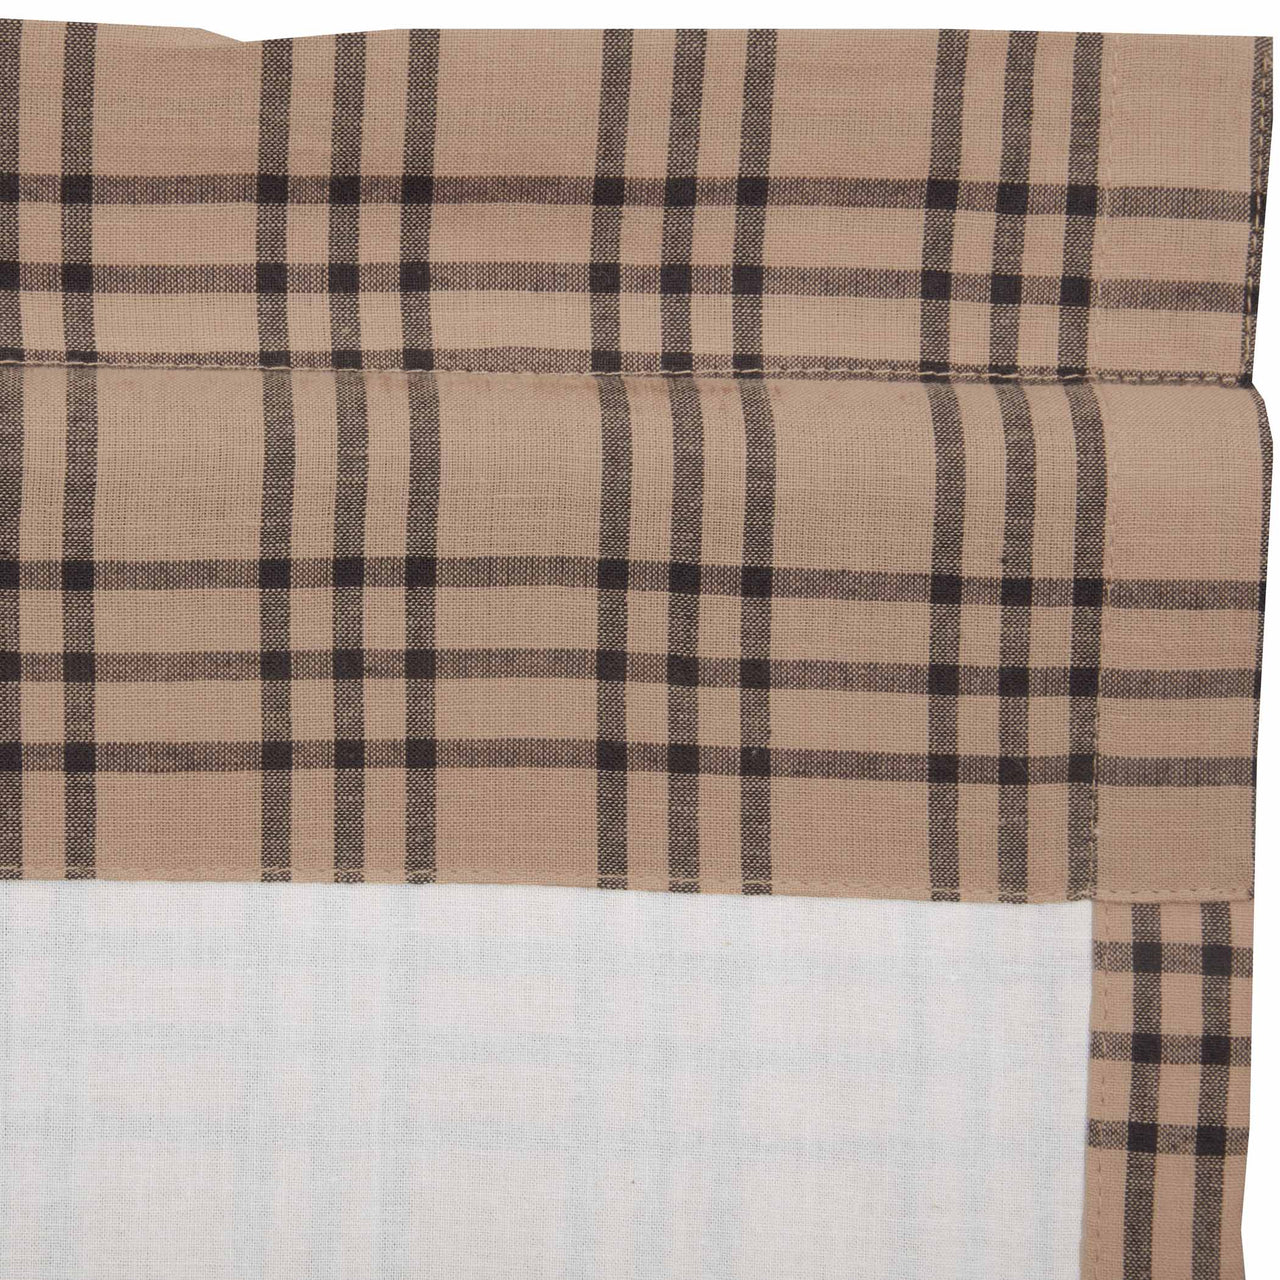 Sawyer Mill Charcoal Plaid Tier Curtain Set VHC Brands